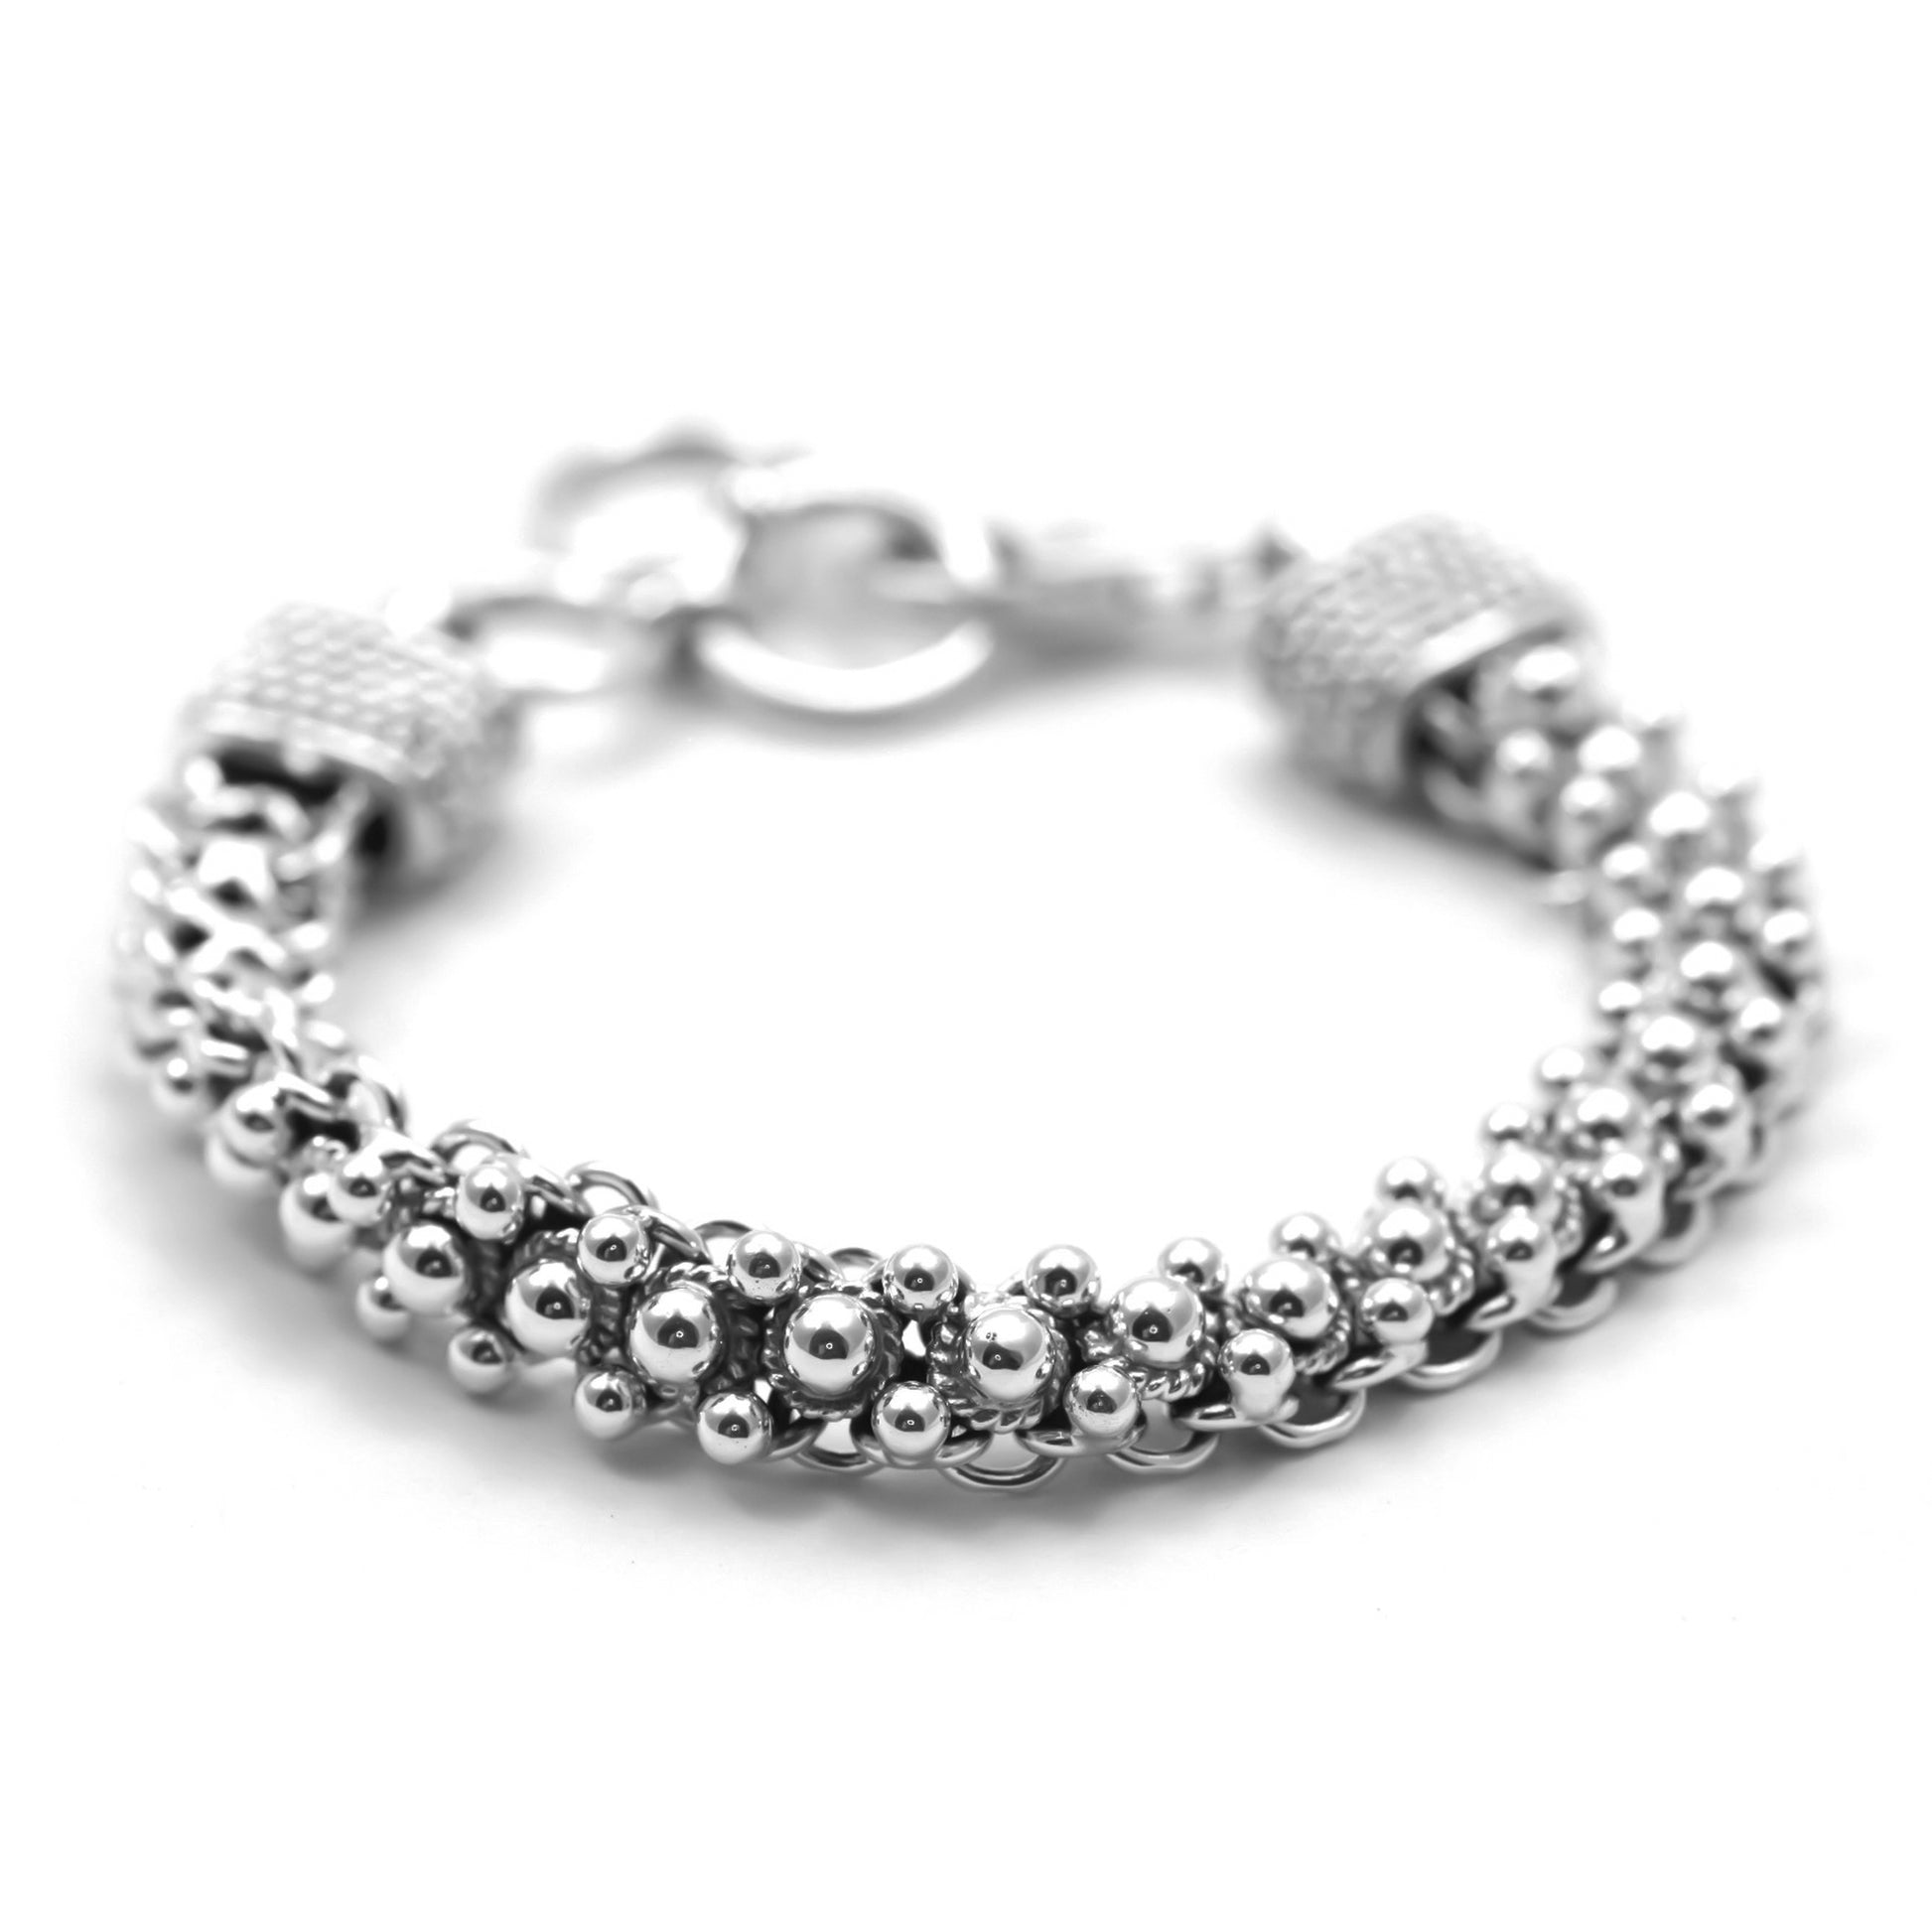 Flexible soft silver bracelet with polished bead design.